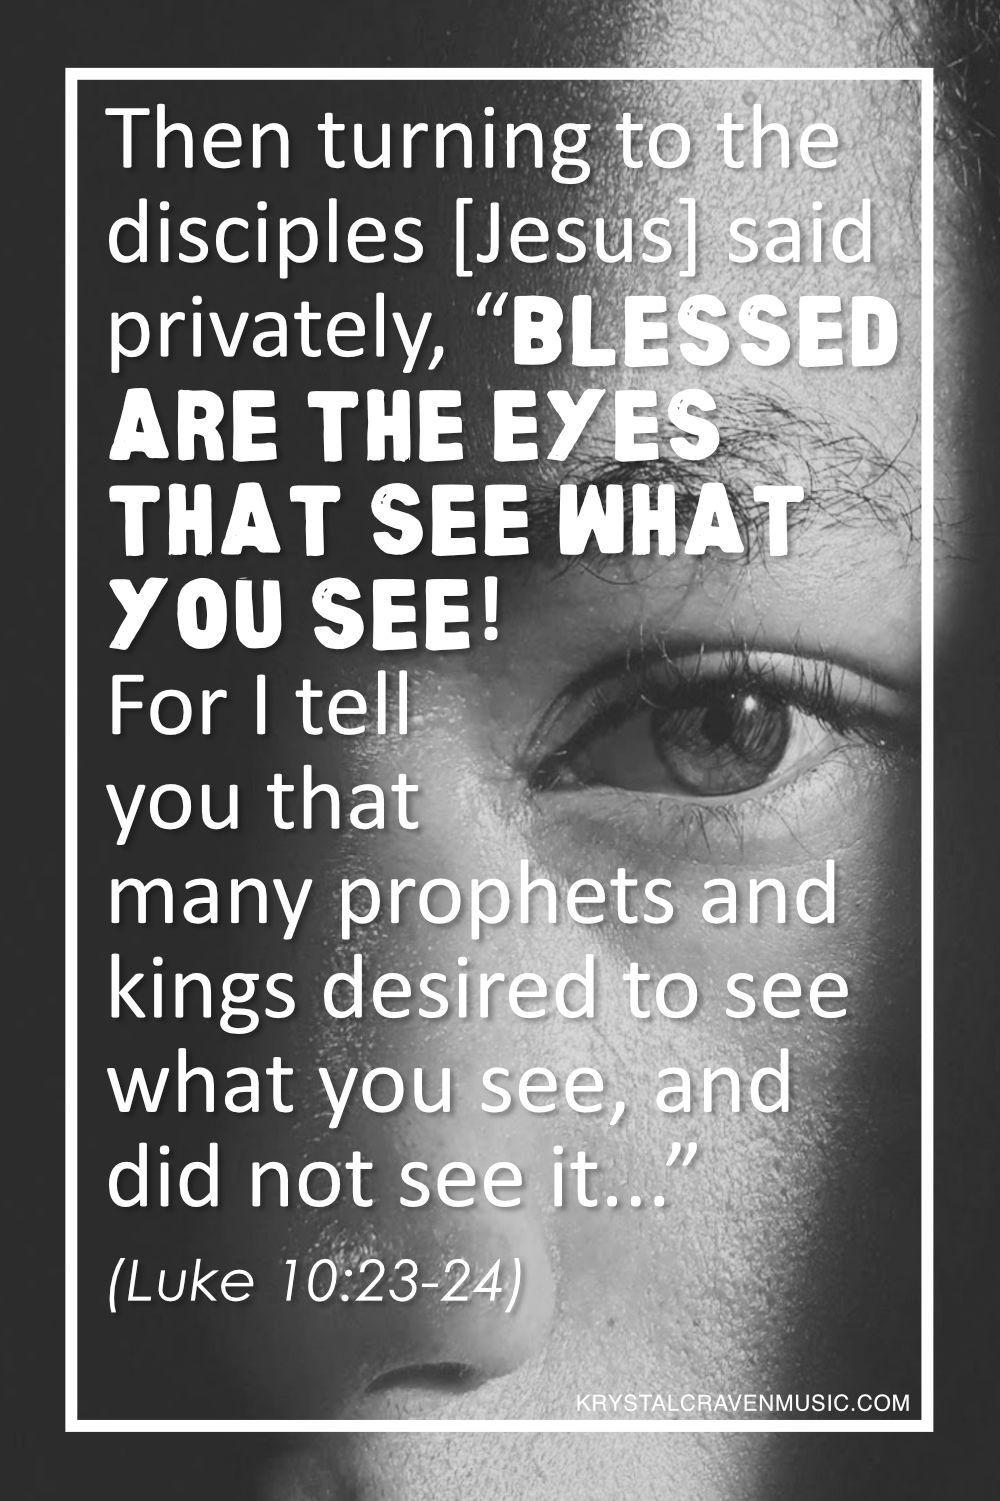 The text from Luke 10:23-24 "Then turning to the disciples [Jesus] said privately, “Blessed are the eyes that see what you see! For I tell you that many prophets and kings desired to see what you see, and did not see it...”" in a white font overlaying a person's face heavily shadowed, except for a sliver of light revealing the area around the left eye.